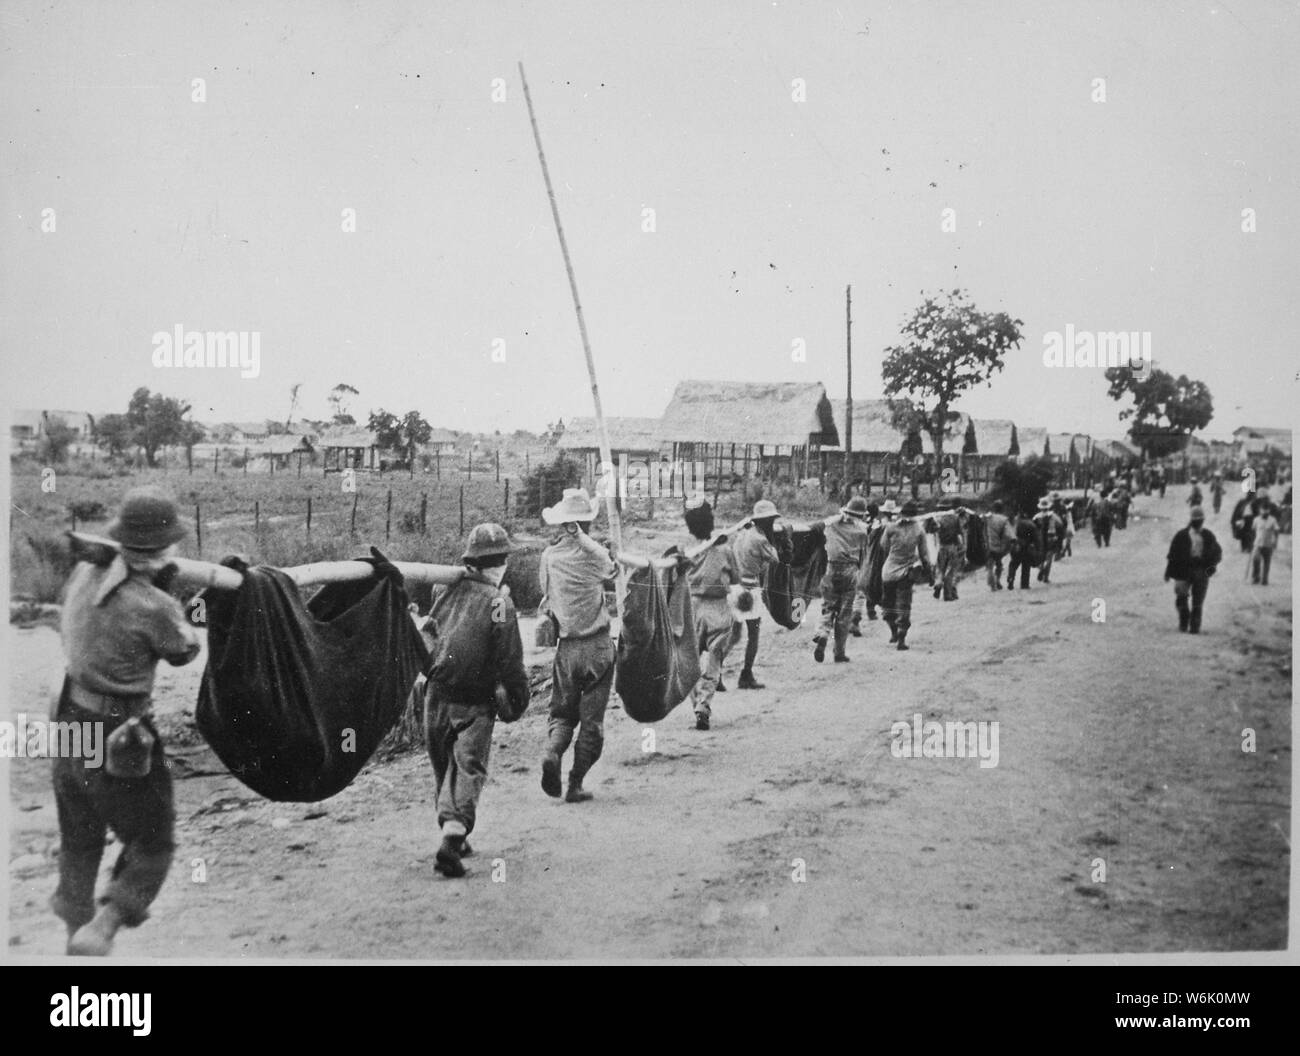 Photograph of American Prisoners Using Improvised Litters to Carry Comrades; Scope and content:  Original caption: This picture, captured from the Japanese, shows American prisoners using improvised litters to carry those of their comrades who, from the lack of food or water on the march from Bataan, fell along the road. Philippines, May 1942. General notes:  According to Colonel Melvin H. Rosen (U.S. Army Retired), this image is not a photograph taken during the Bataan Death March, but rather a photograph of a burial detail at Camp O'Donnell, the terminus of the Death March.  Mr. Rosen is a s Stock Photo